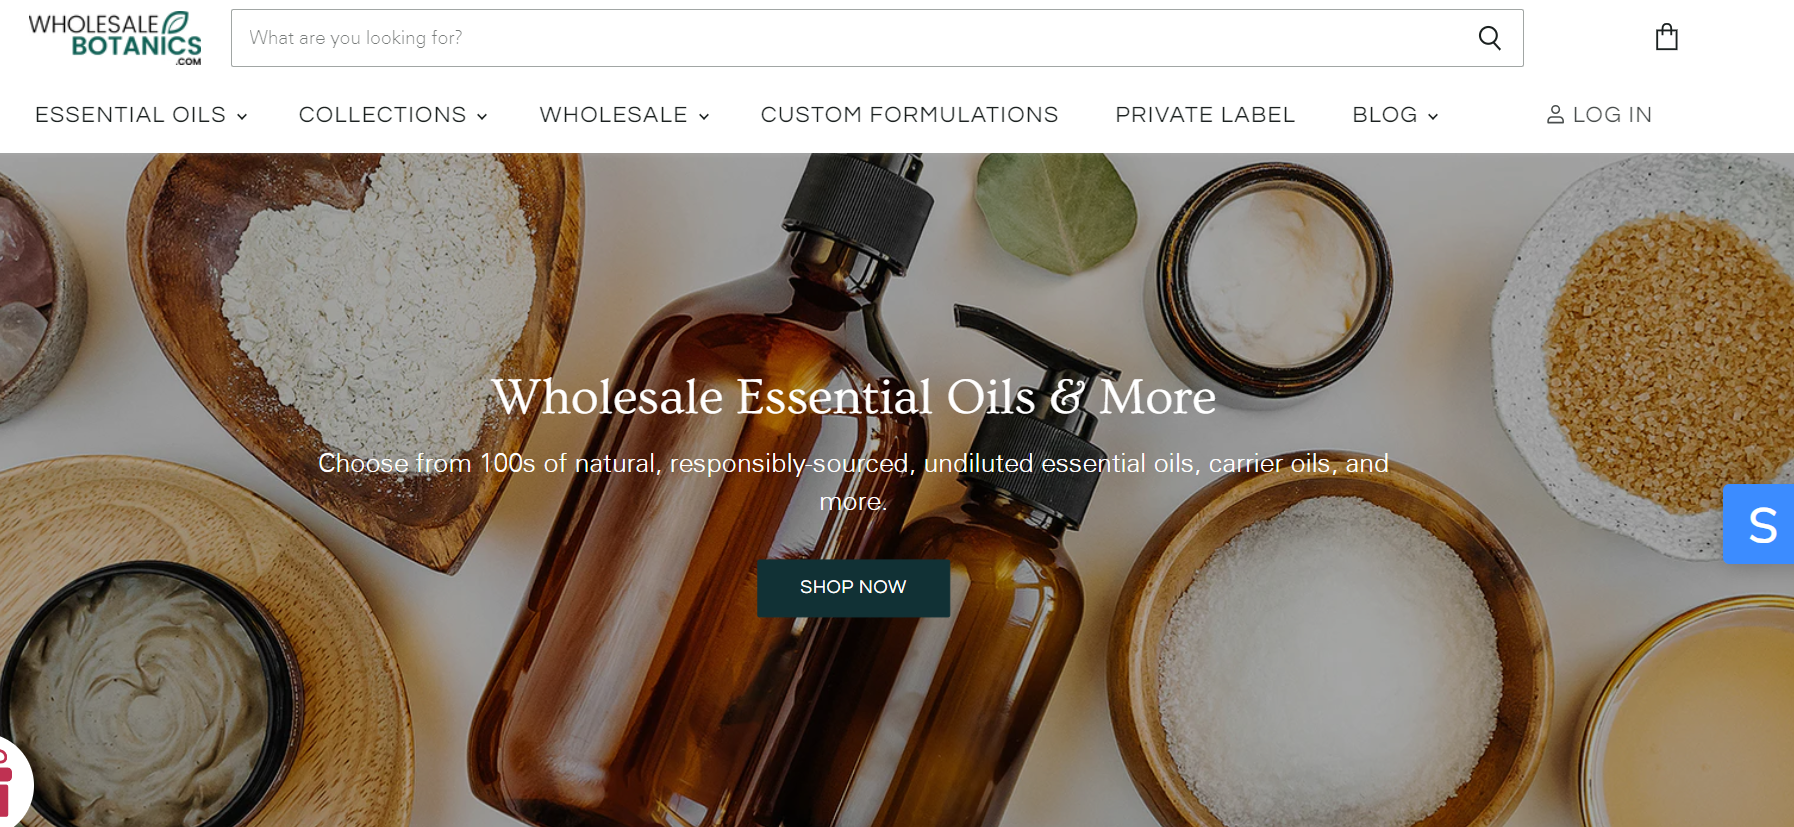 Wholesale Botanics, based in the United States, is a supplier of botanical products suitable for private label dropshipping. 